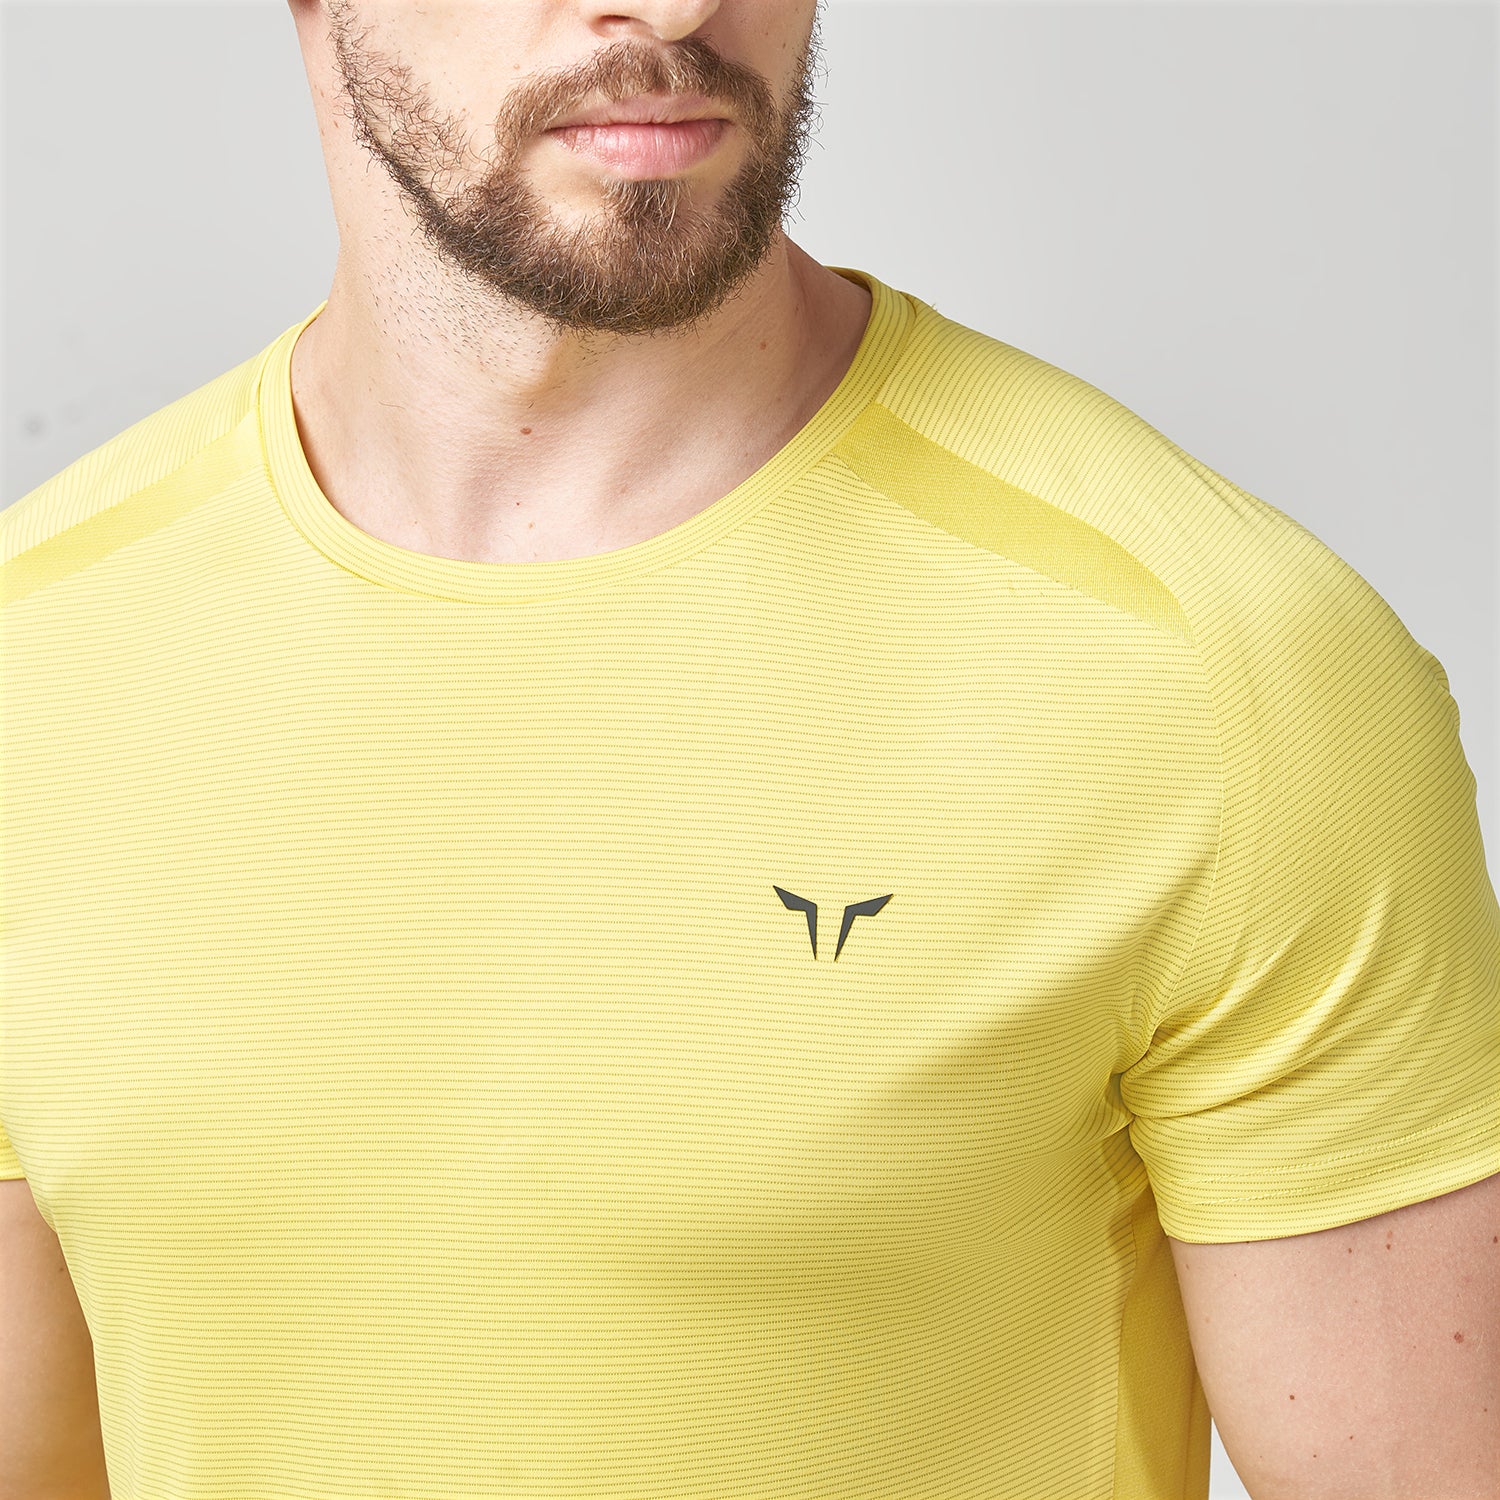 squatwolf-gym-wear-lab360-active-tee-yellow-workout-shirts-for-men